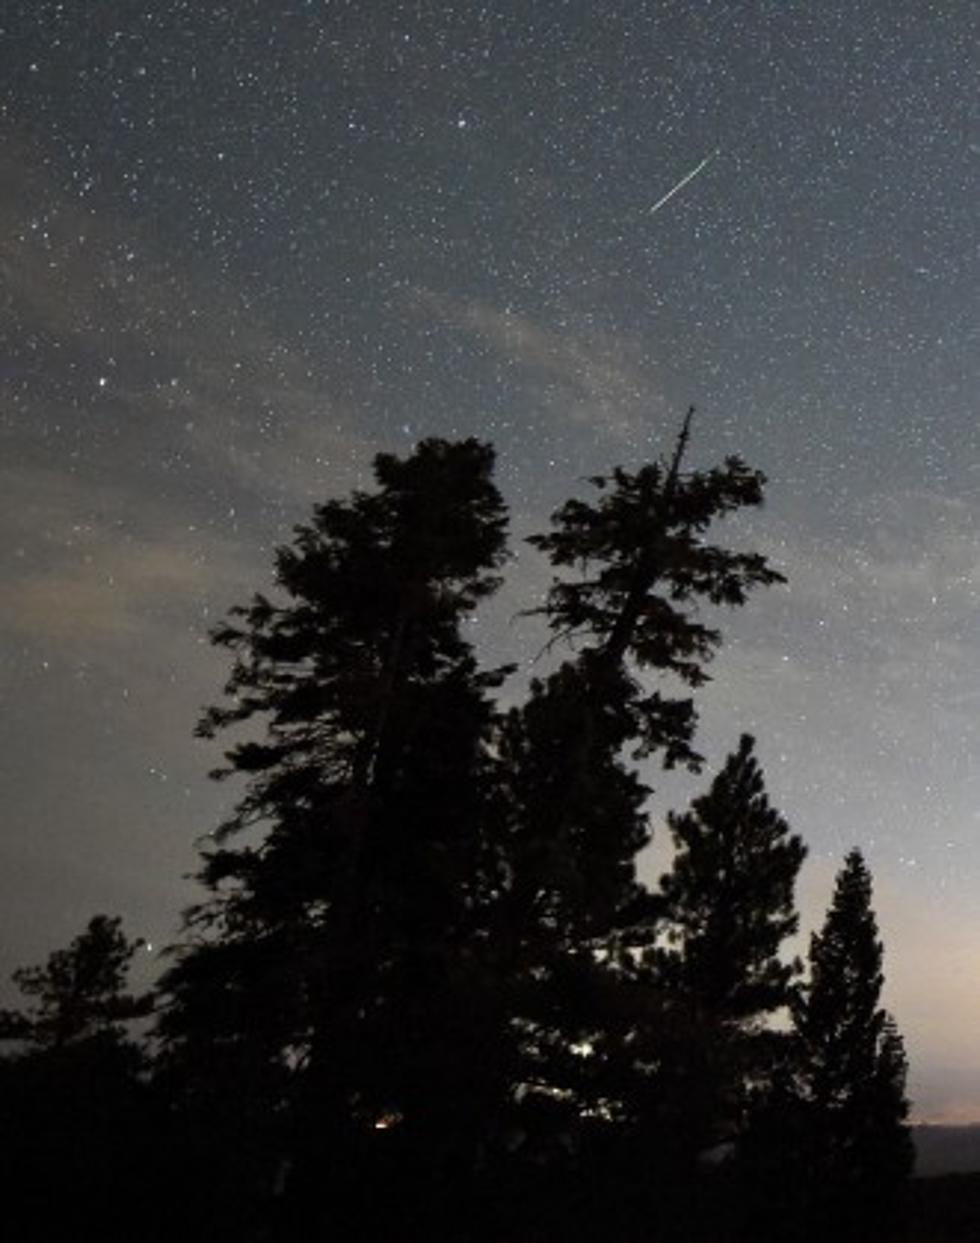 Are You Watching The Leonid Meteor Shower This Week?